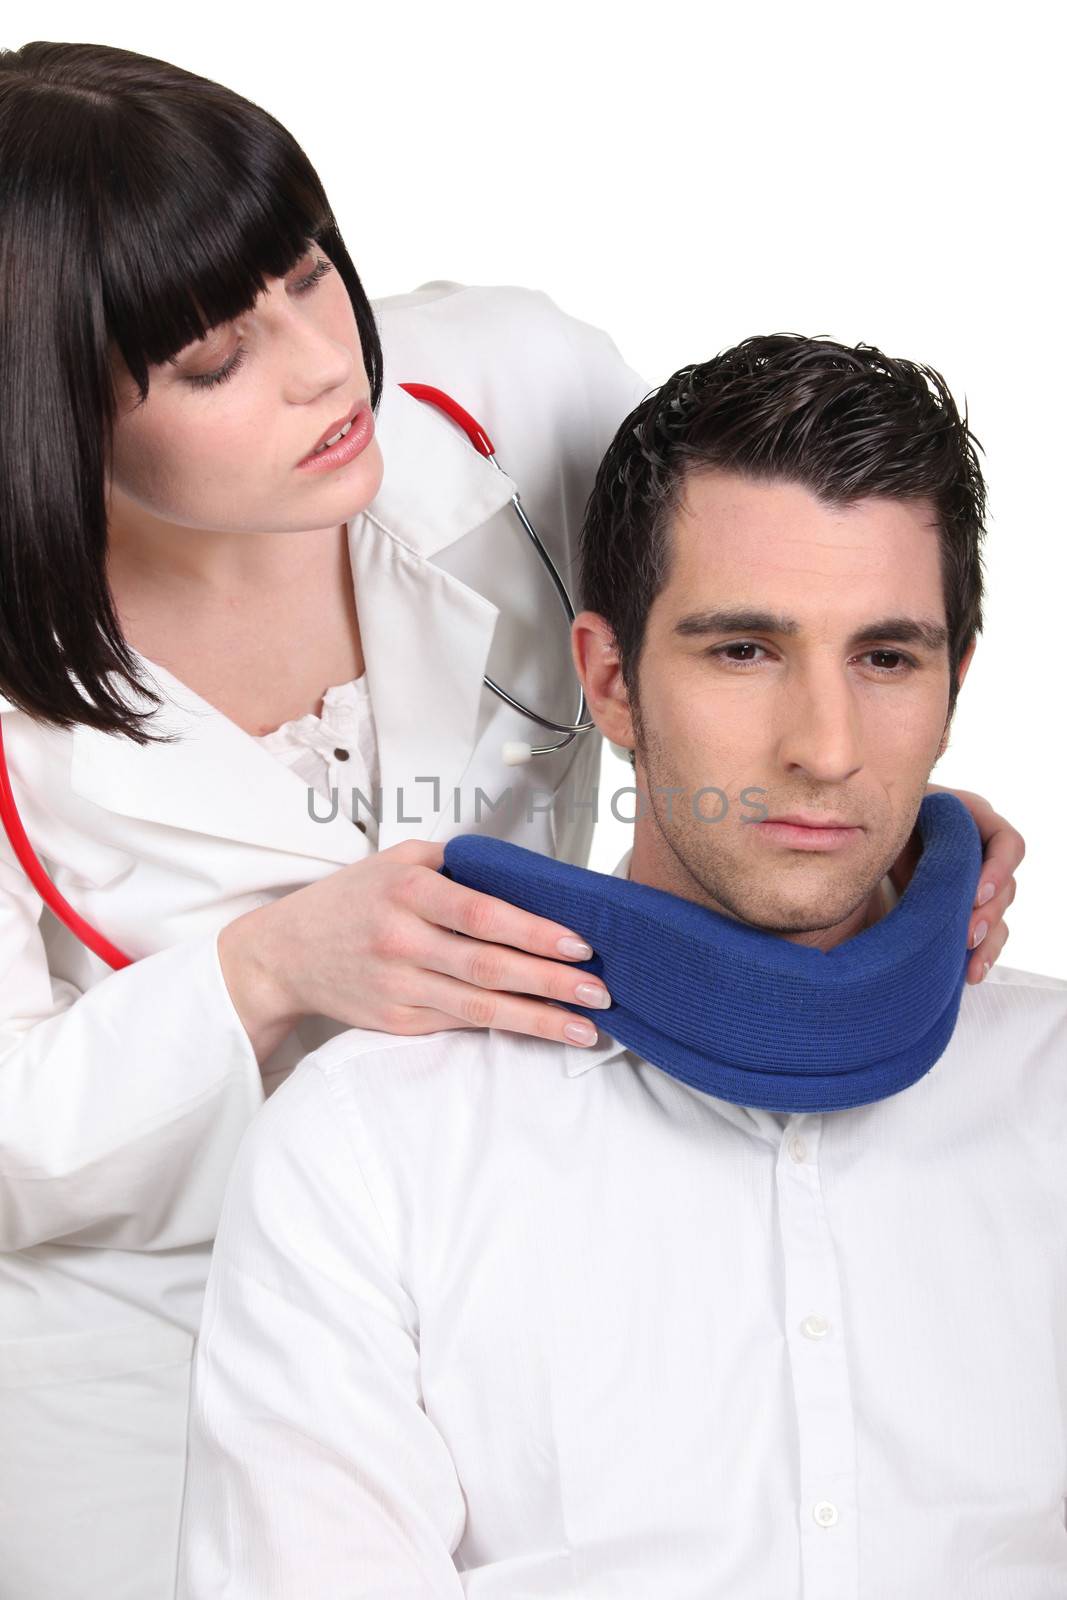 Doctor putting a neck brace on her patient